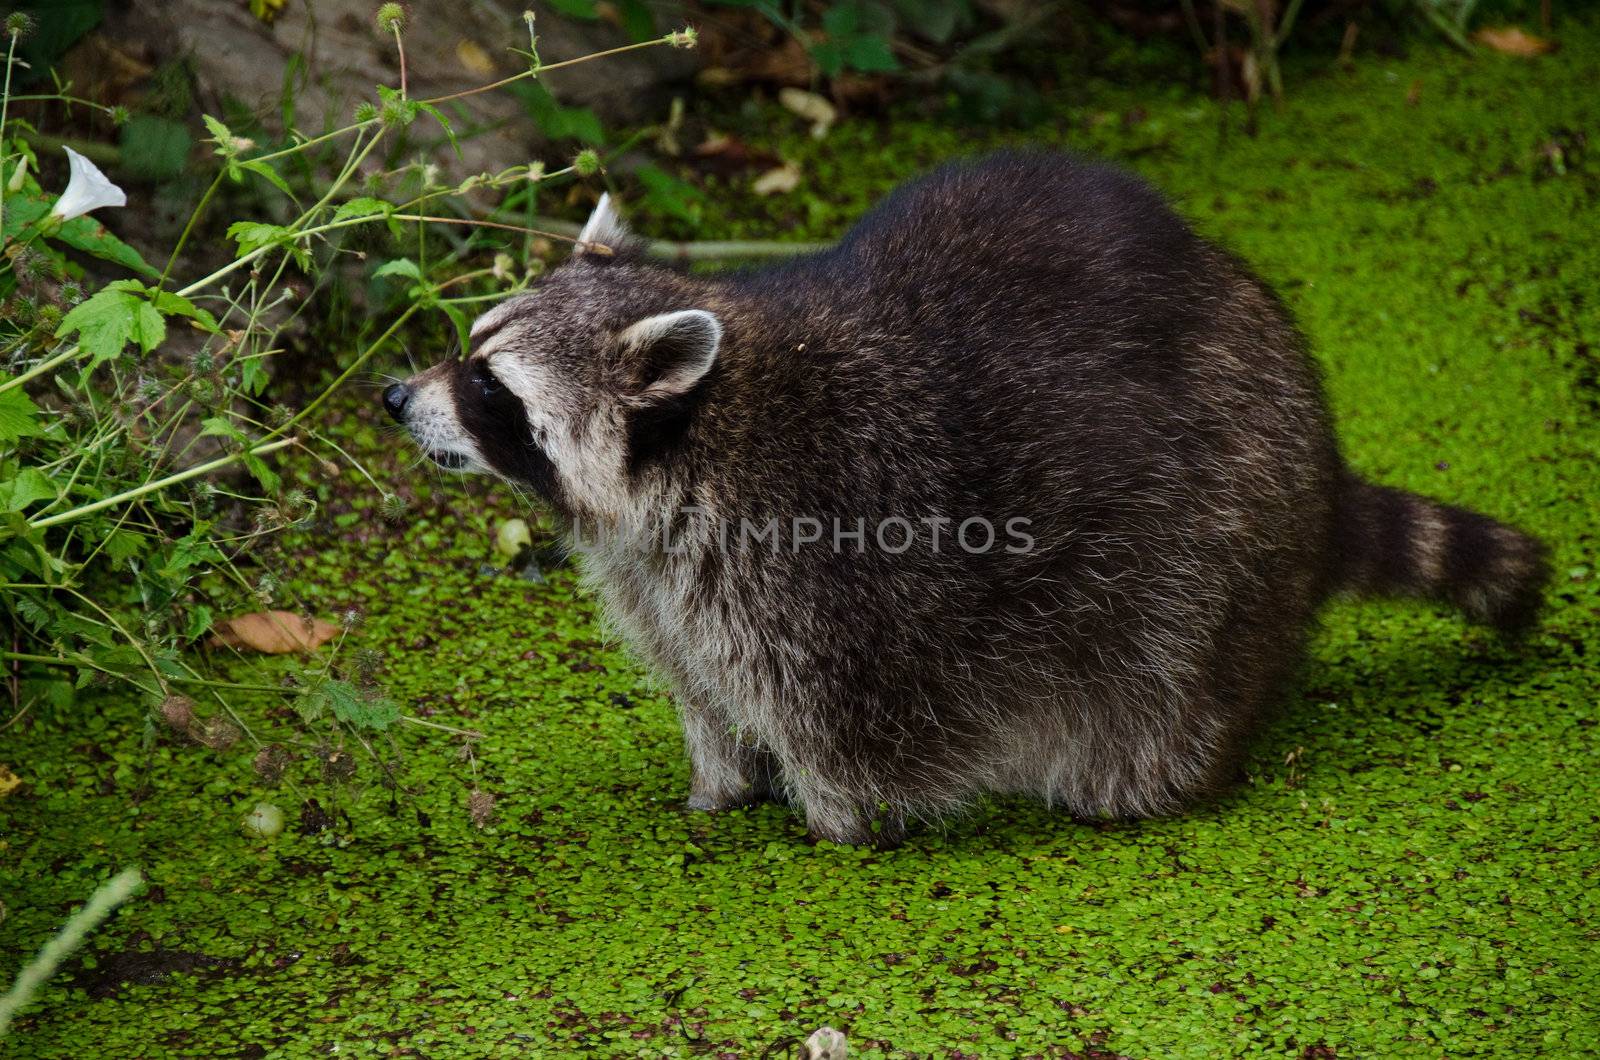 Racoon, Procyon lotor, sitting in a water pit and looking for food